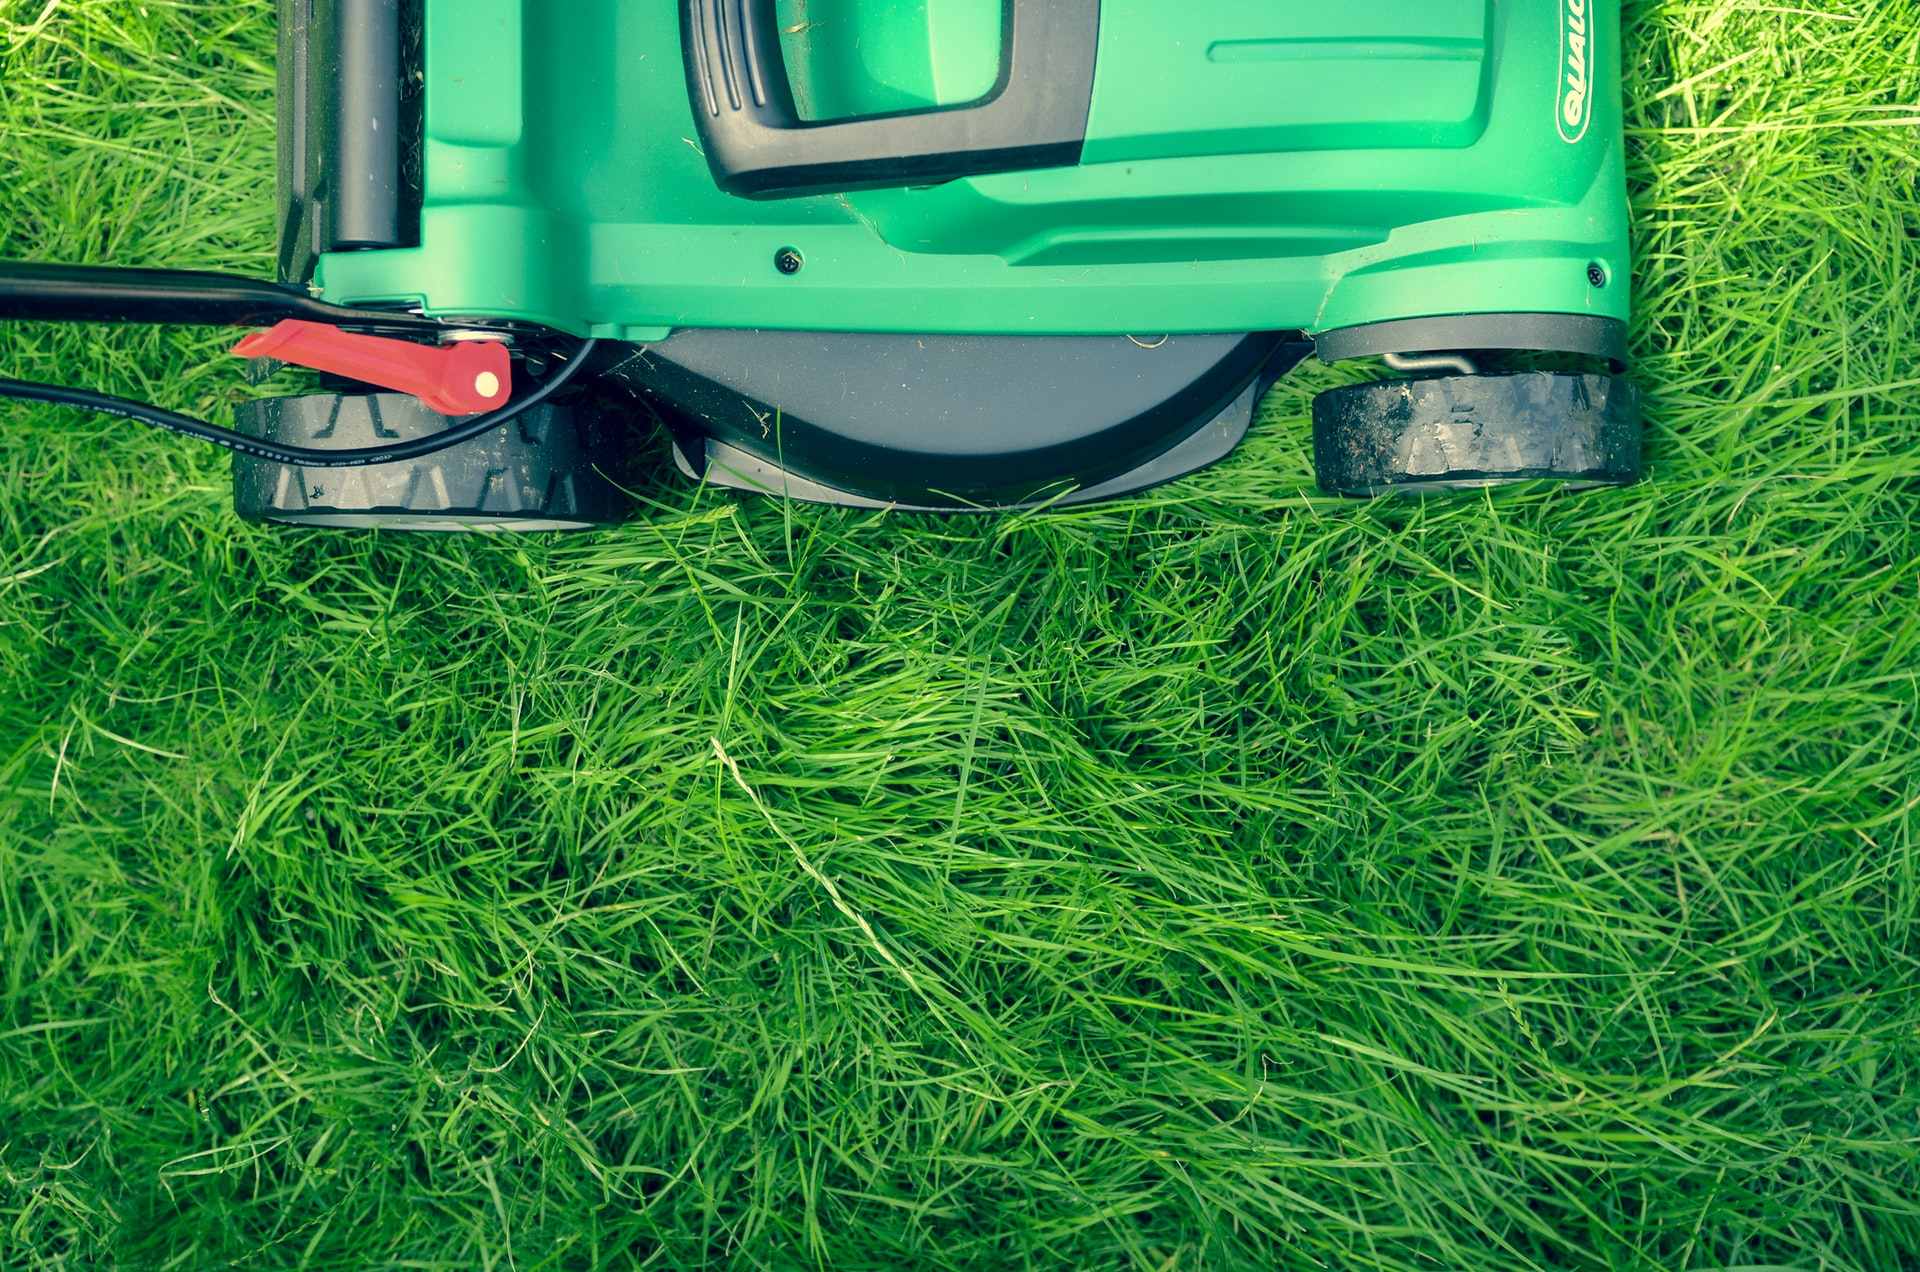 Greenworks vs. EGO Lawn Mowers: Which is the Better Option?